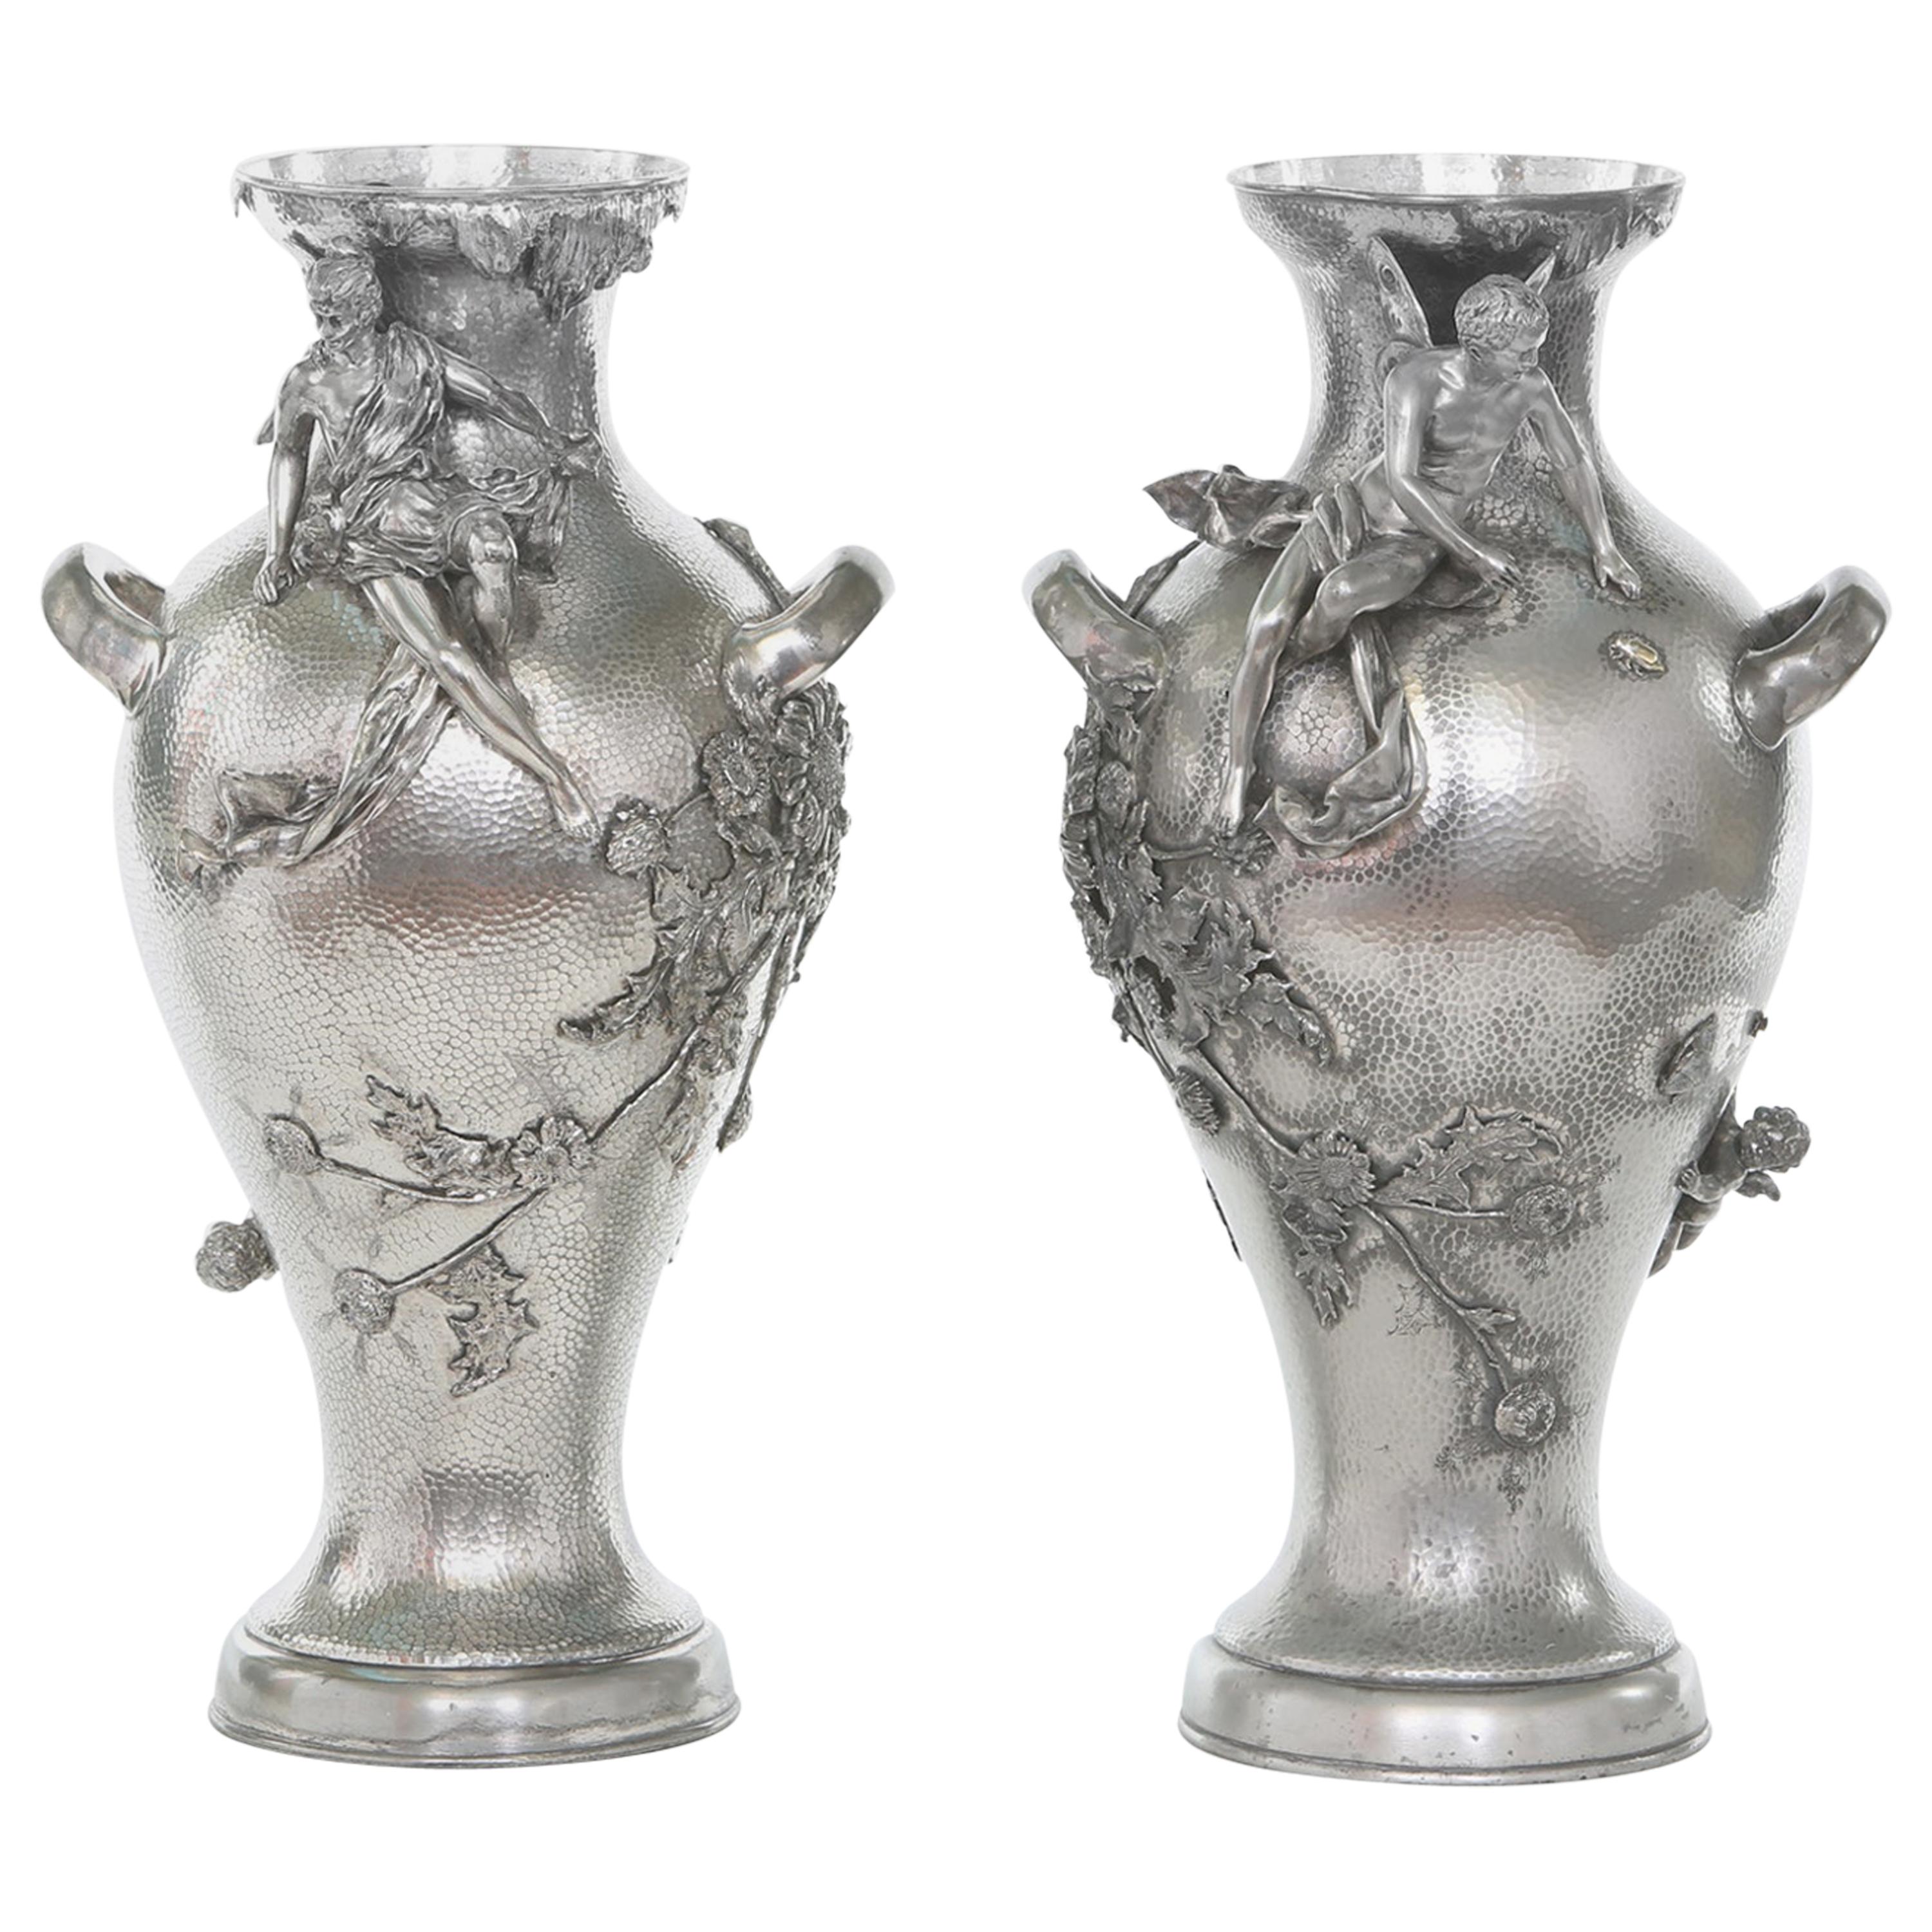 Late 19th Century Silver Plated Pair of Vases / Urns For Sale